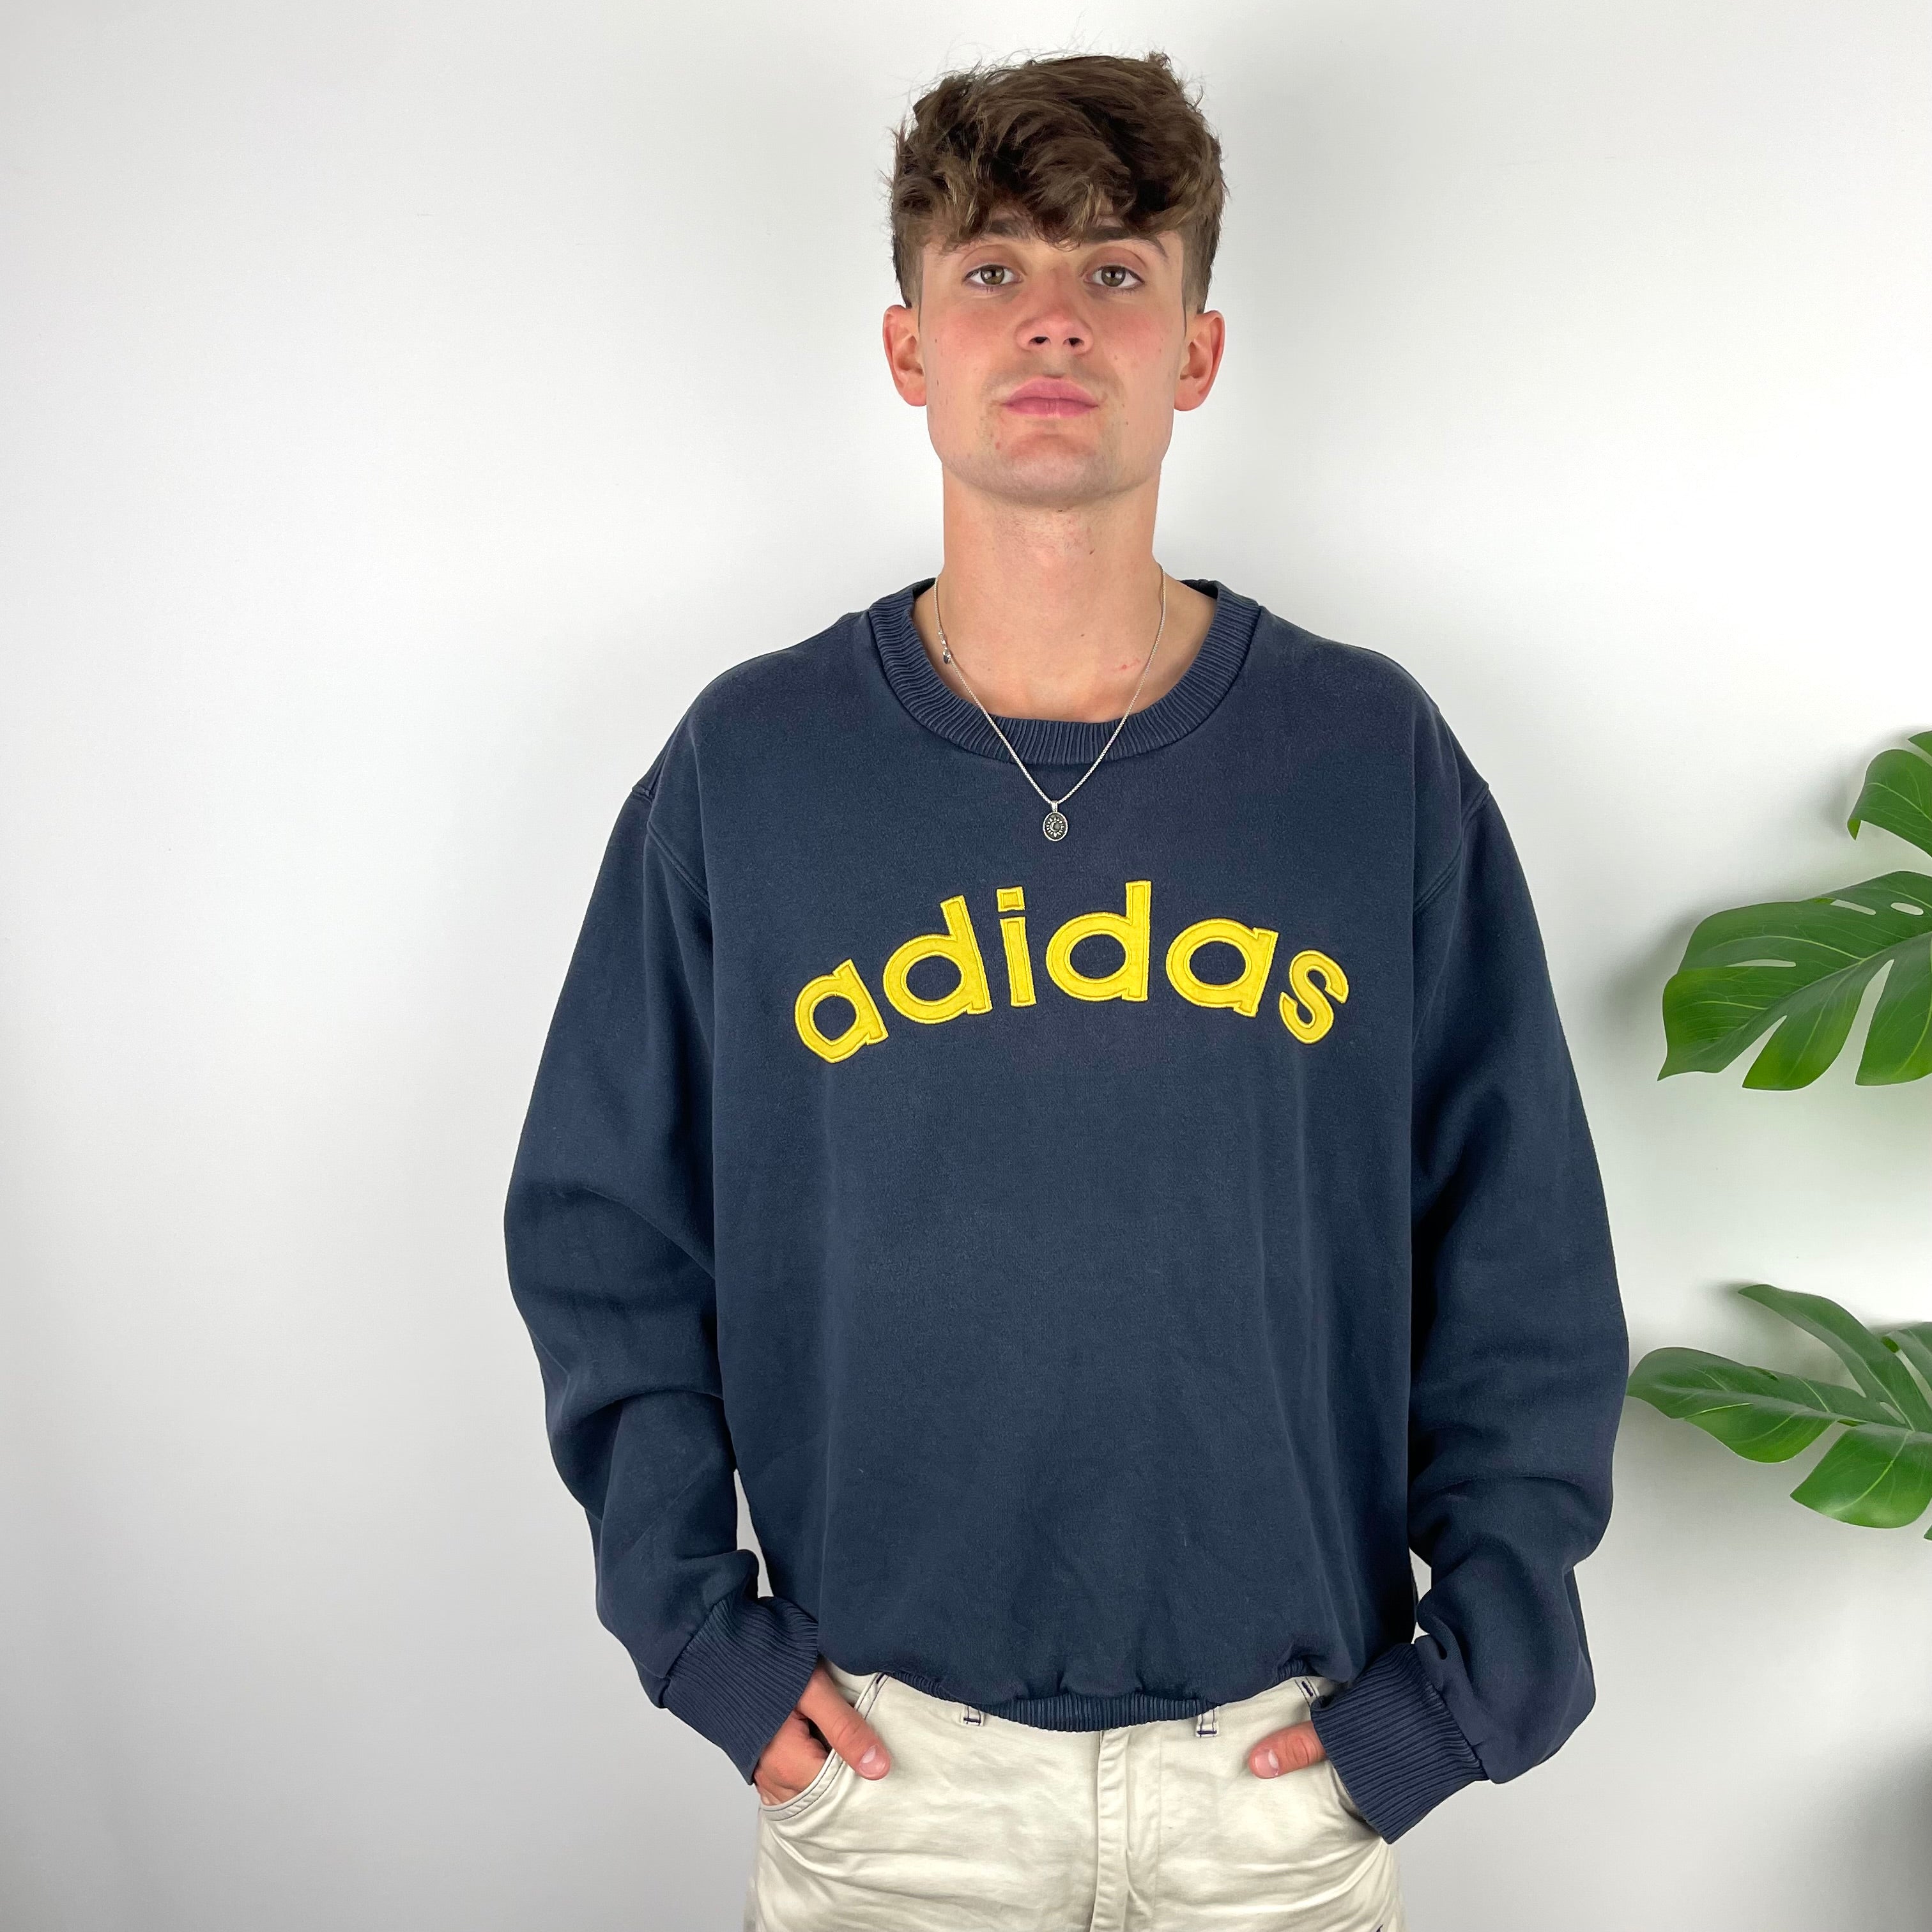 Adidas RARE Navy Embroidered Spell Out Sweatshirt (XXL)